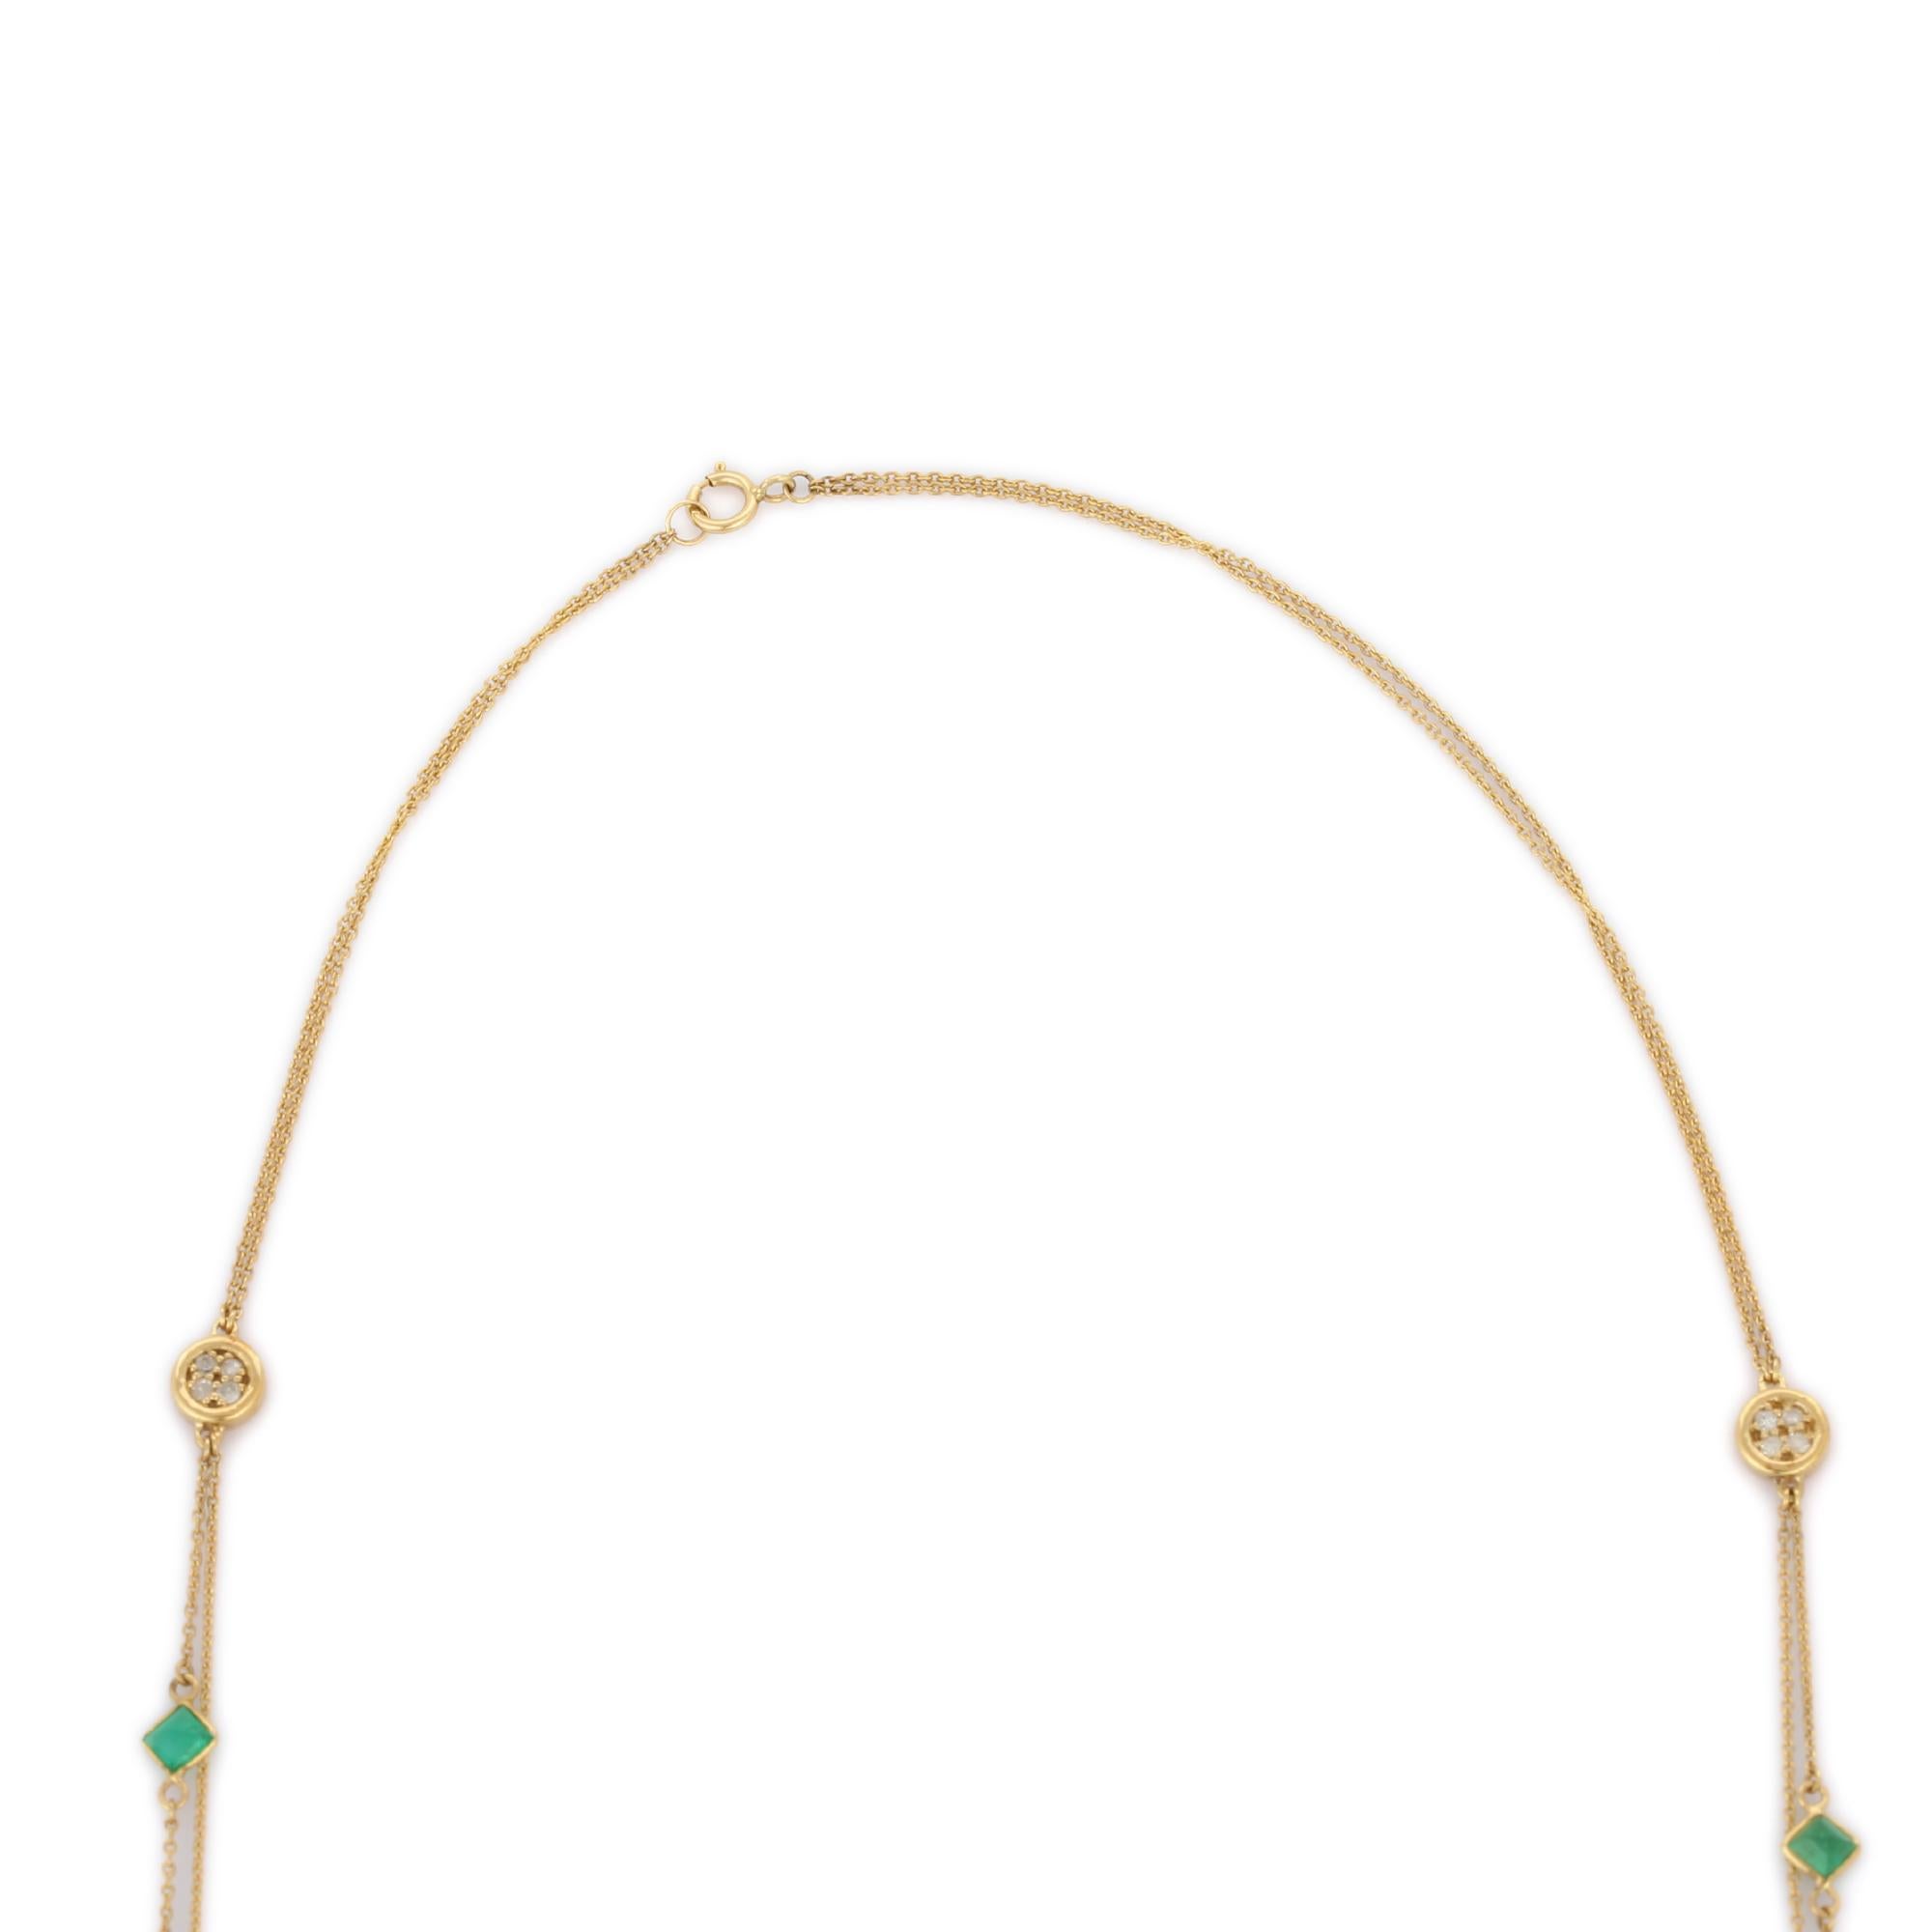 Emerald Necklace in 18K Gold studded with square cut emeralds.
Accessorize your look with this elegant emerald beaded necklace. This stunning piece of jewelry instantly elevates a casual look or dressy outfit. Comfortable and easy to wear, it is